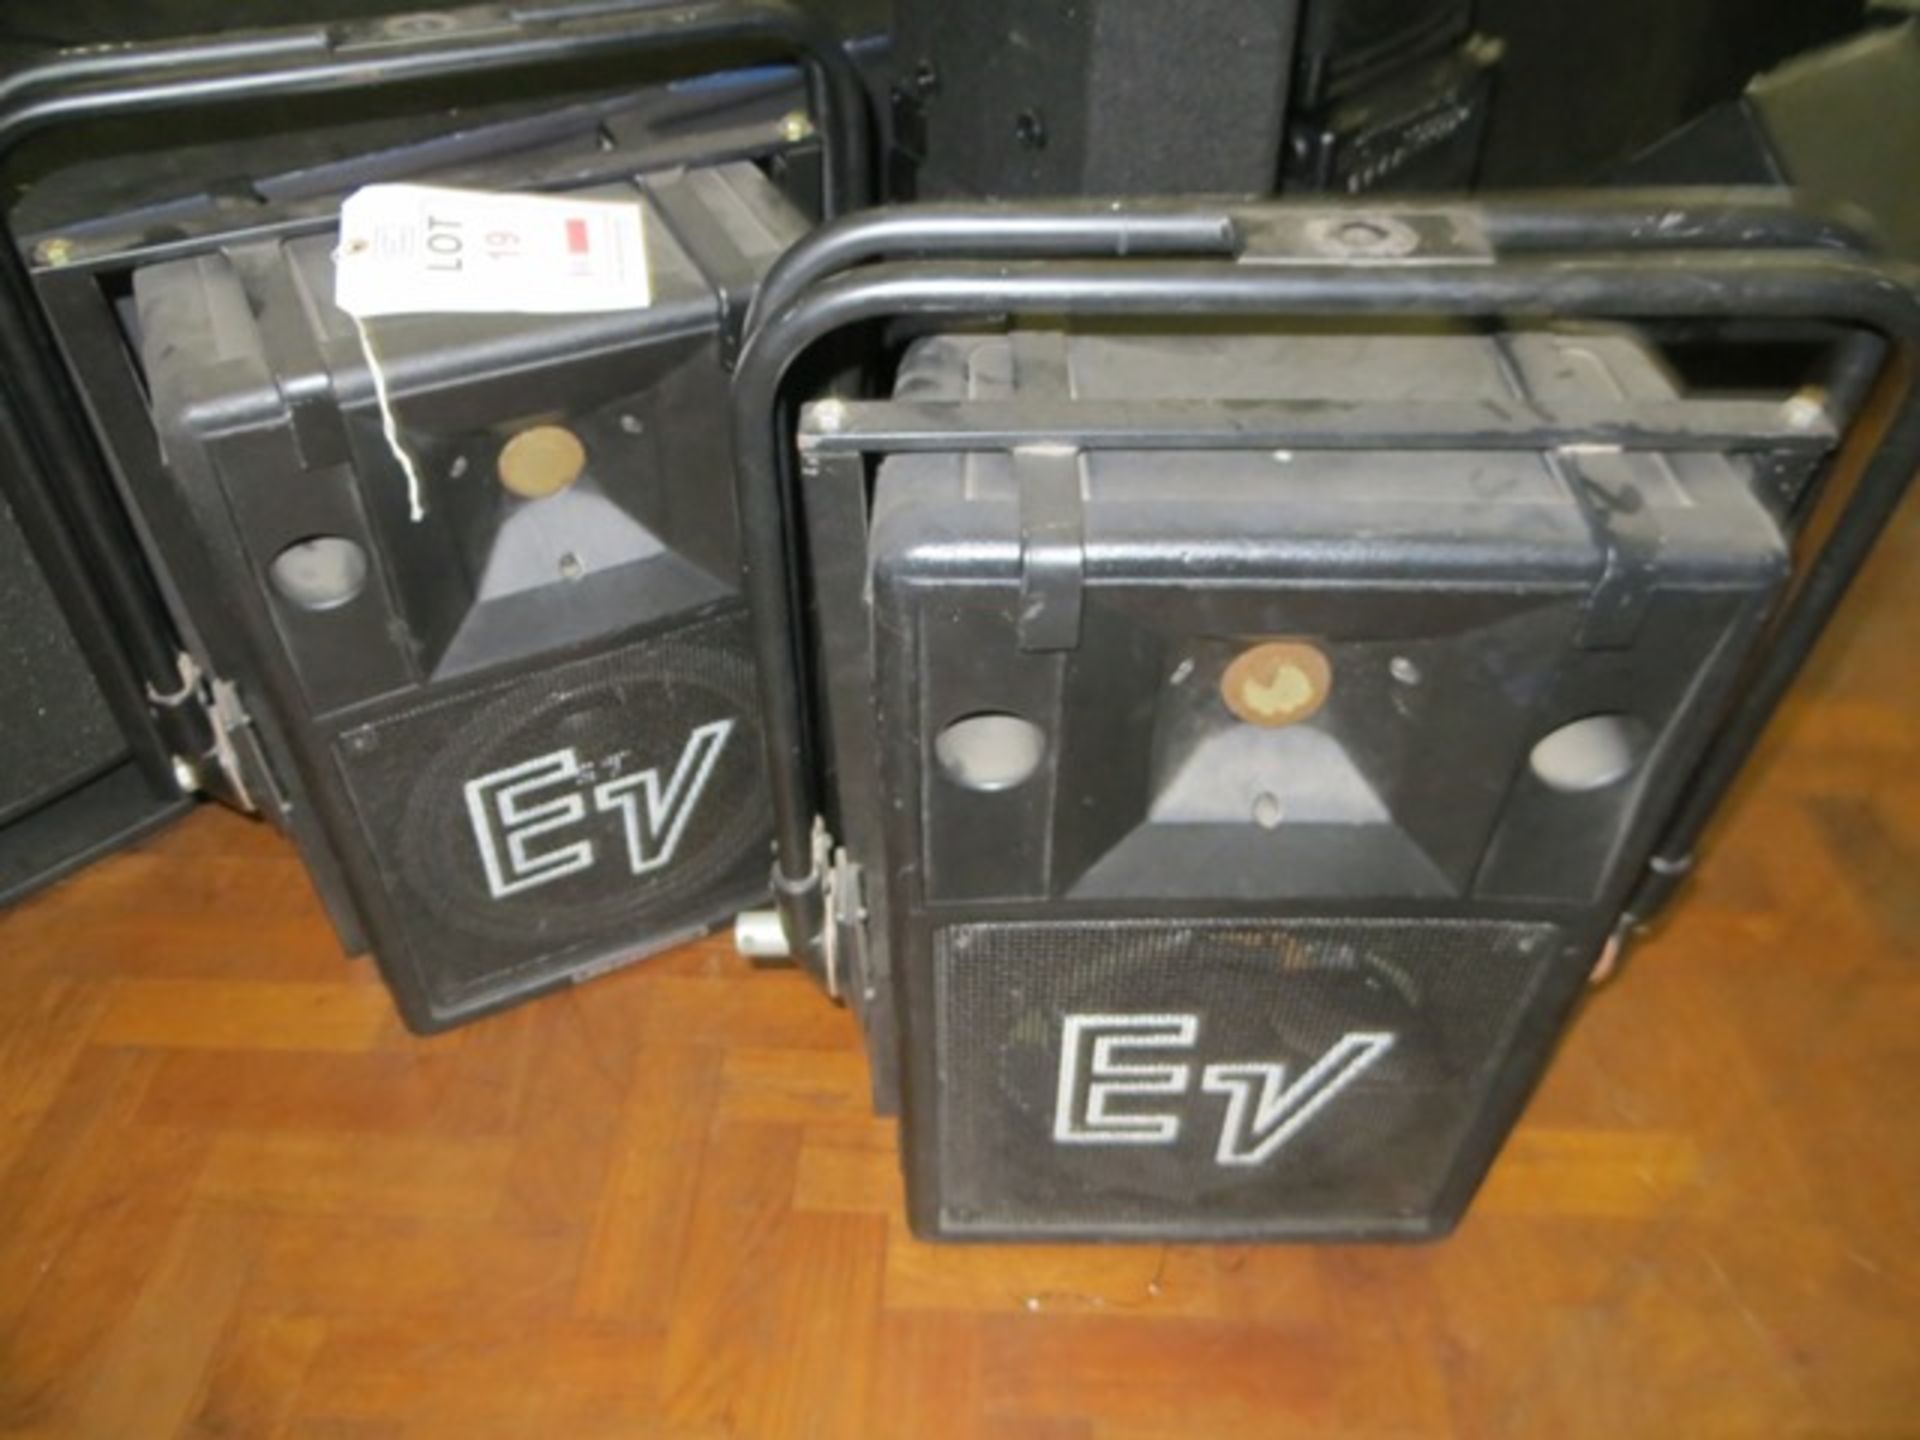 2 EV Tapco speakers model 100S (Please note, for viewing and collection purposes, this item is